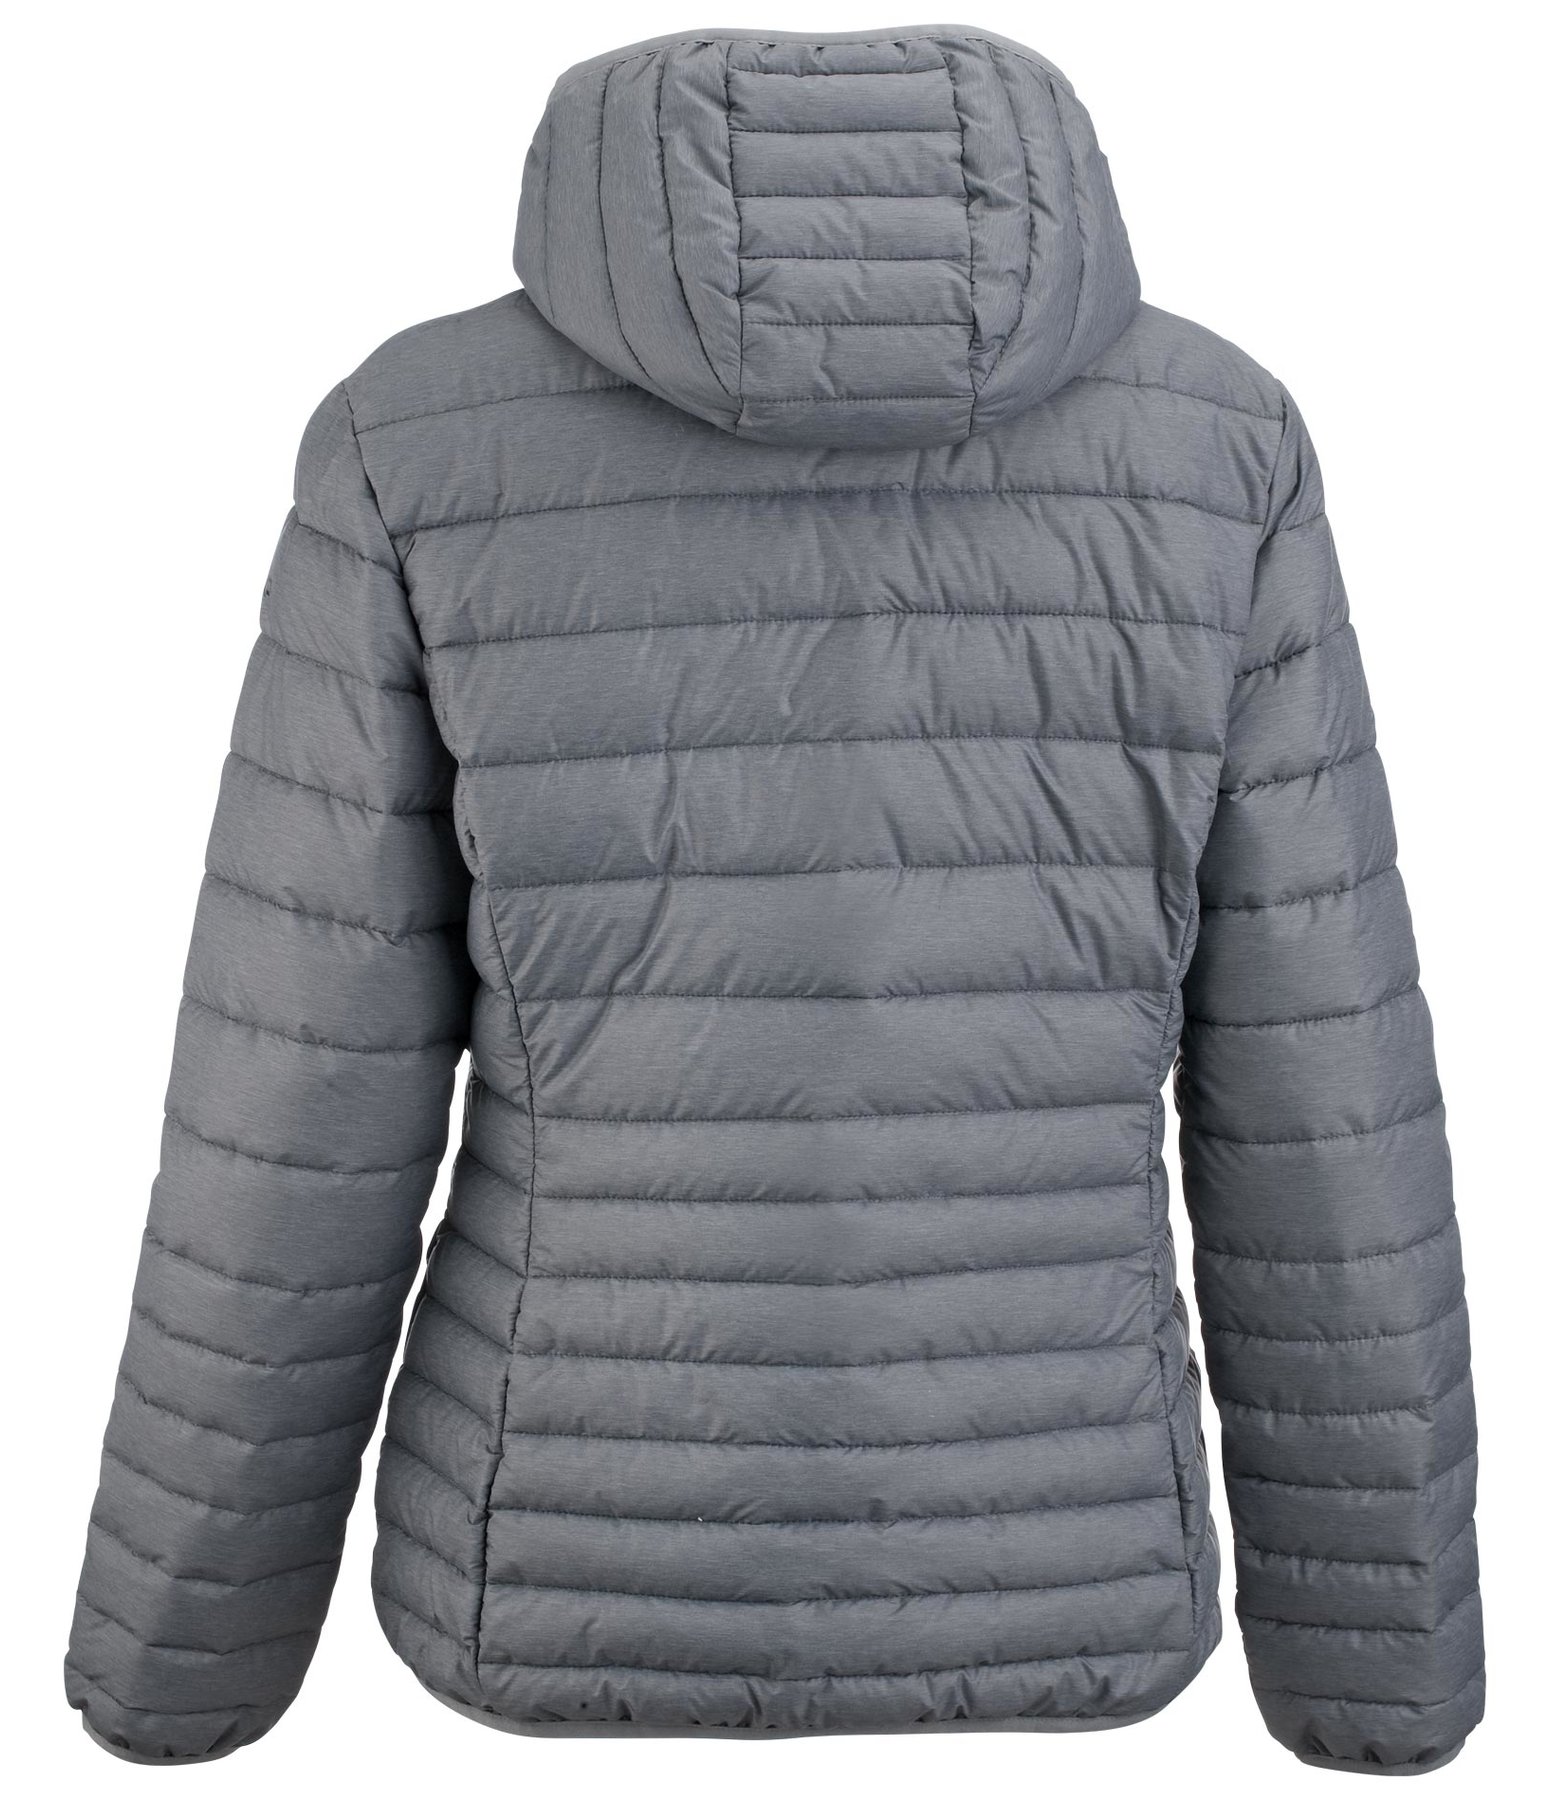 Imitation Down Thinsulate Hooded Jacket Guilia - Kramer Equestrian